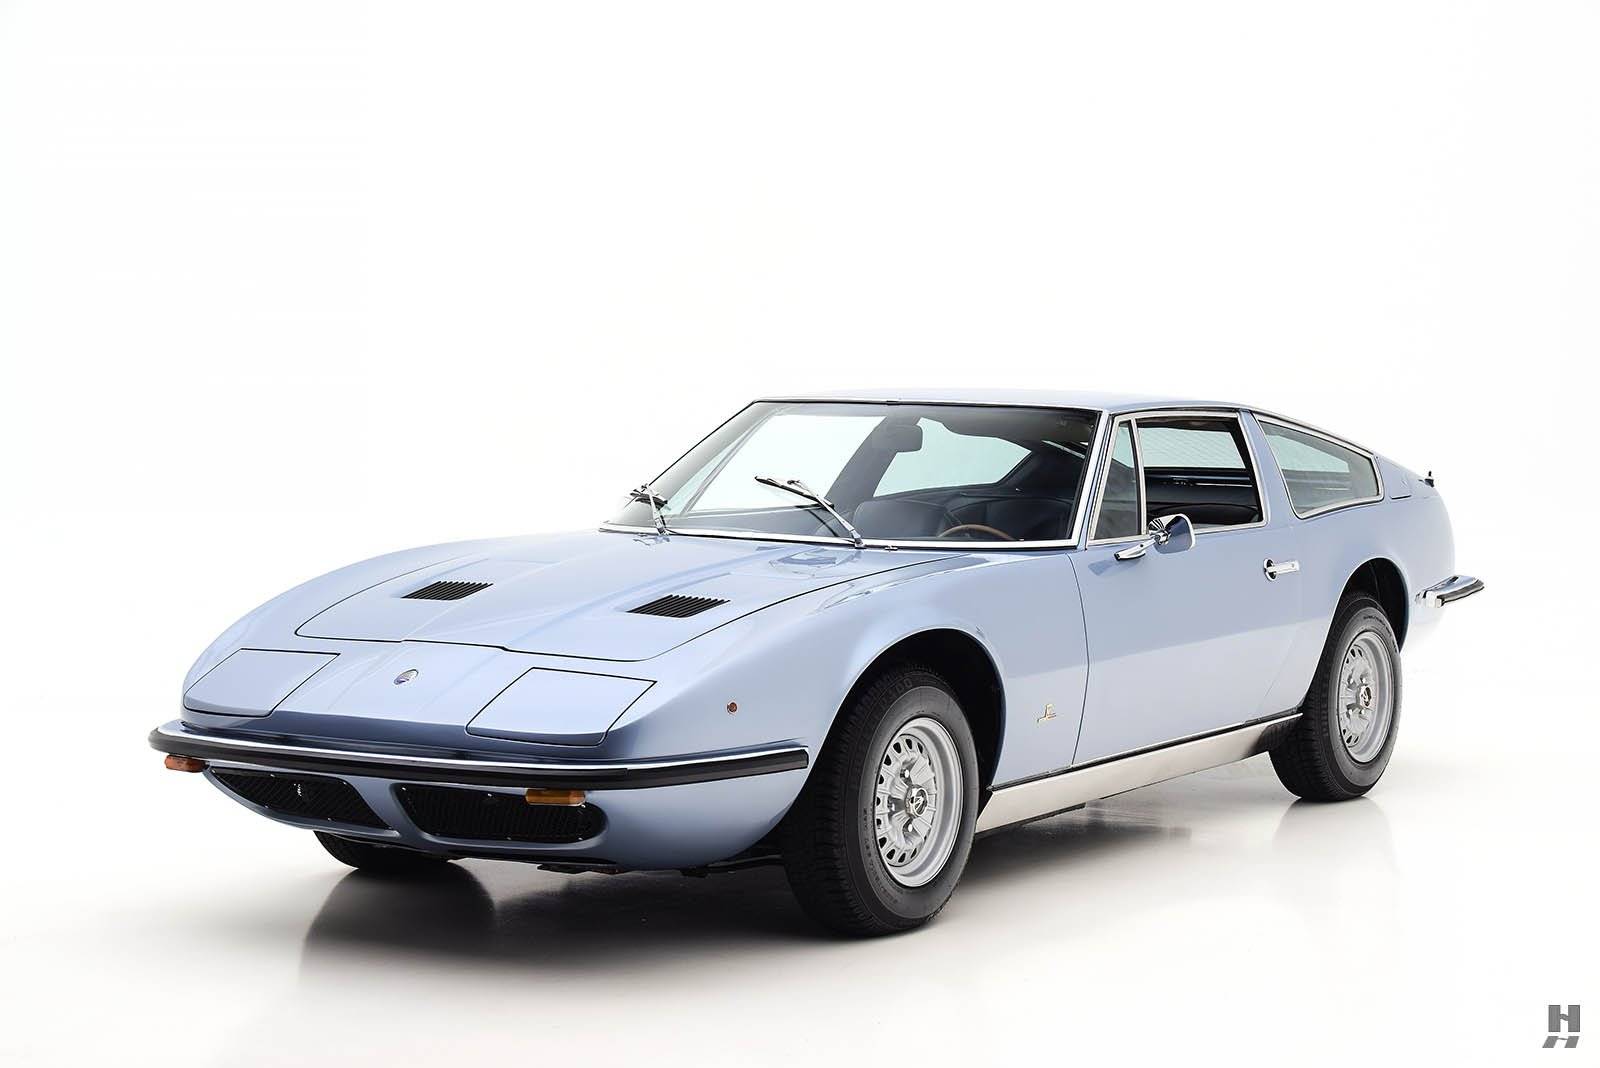 For Sale: Maserati Indy 4200 (1970) offered for AUD 155,106